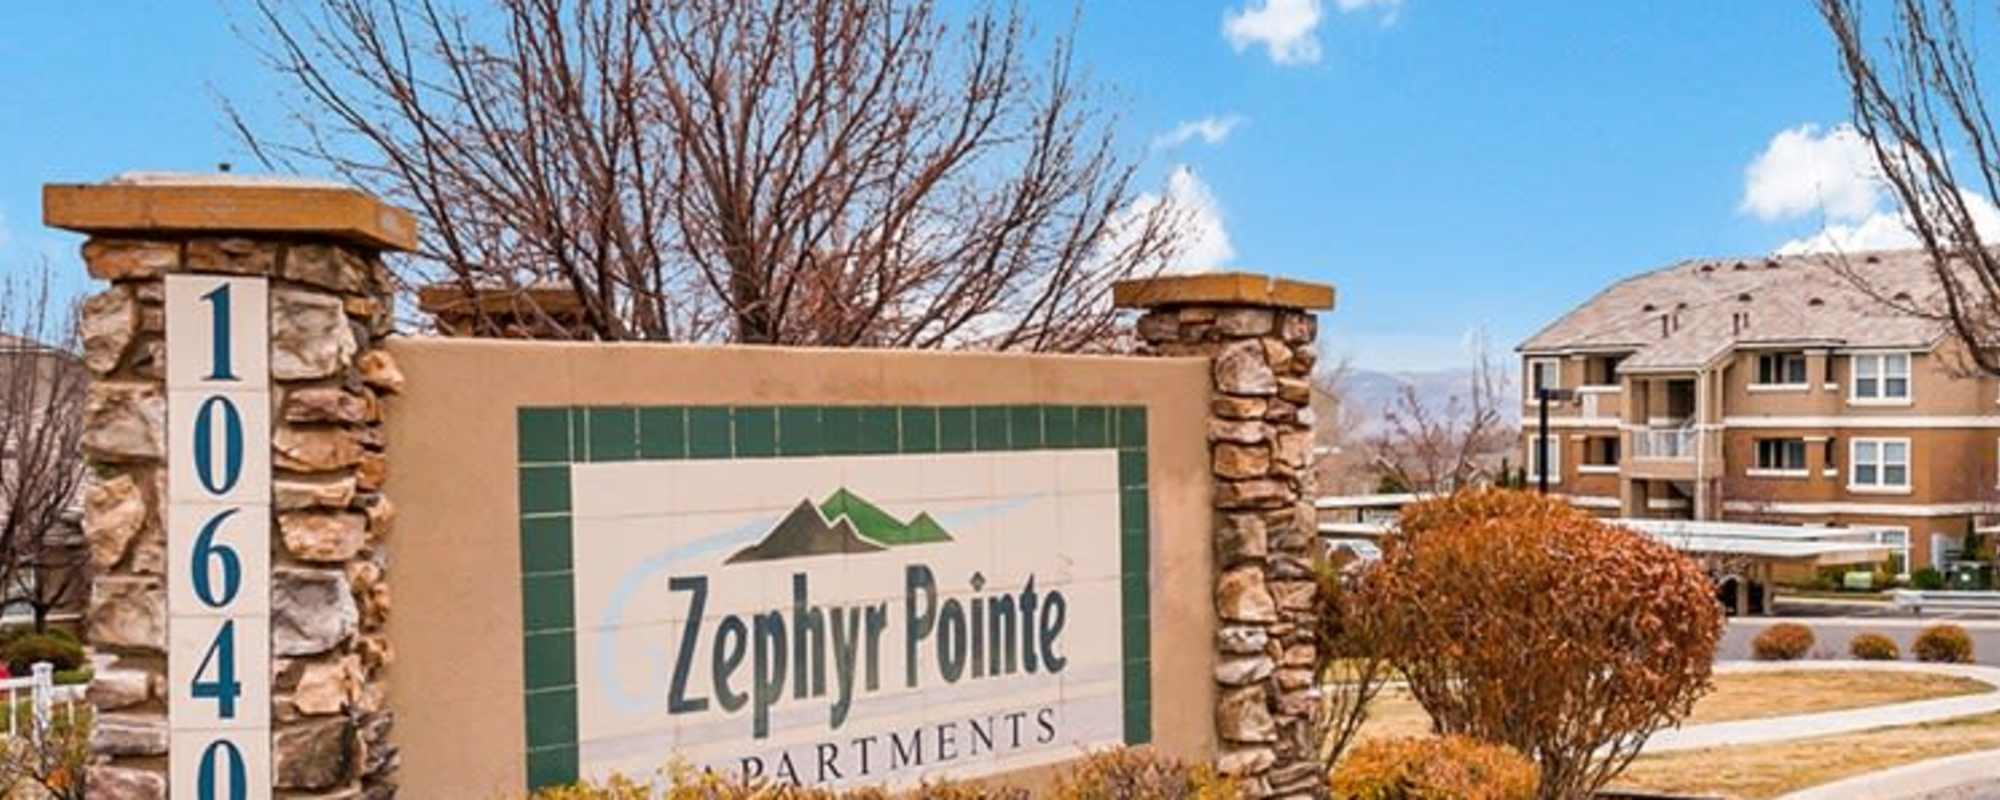 Welcome to Zephyr Pointe in Reno, Nevada